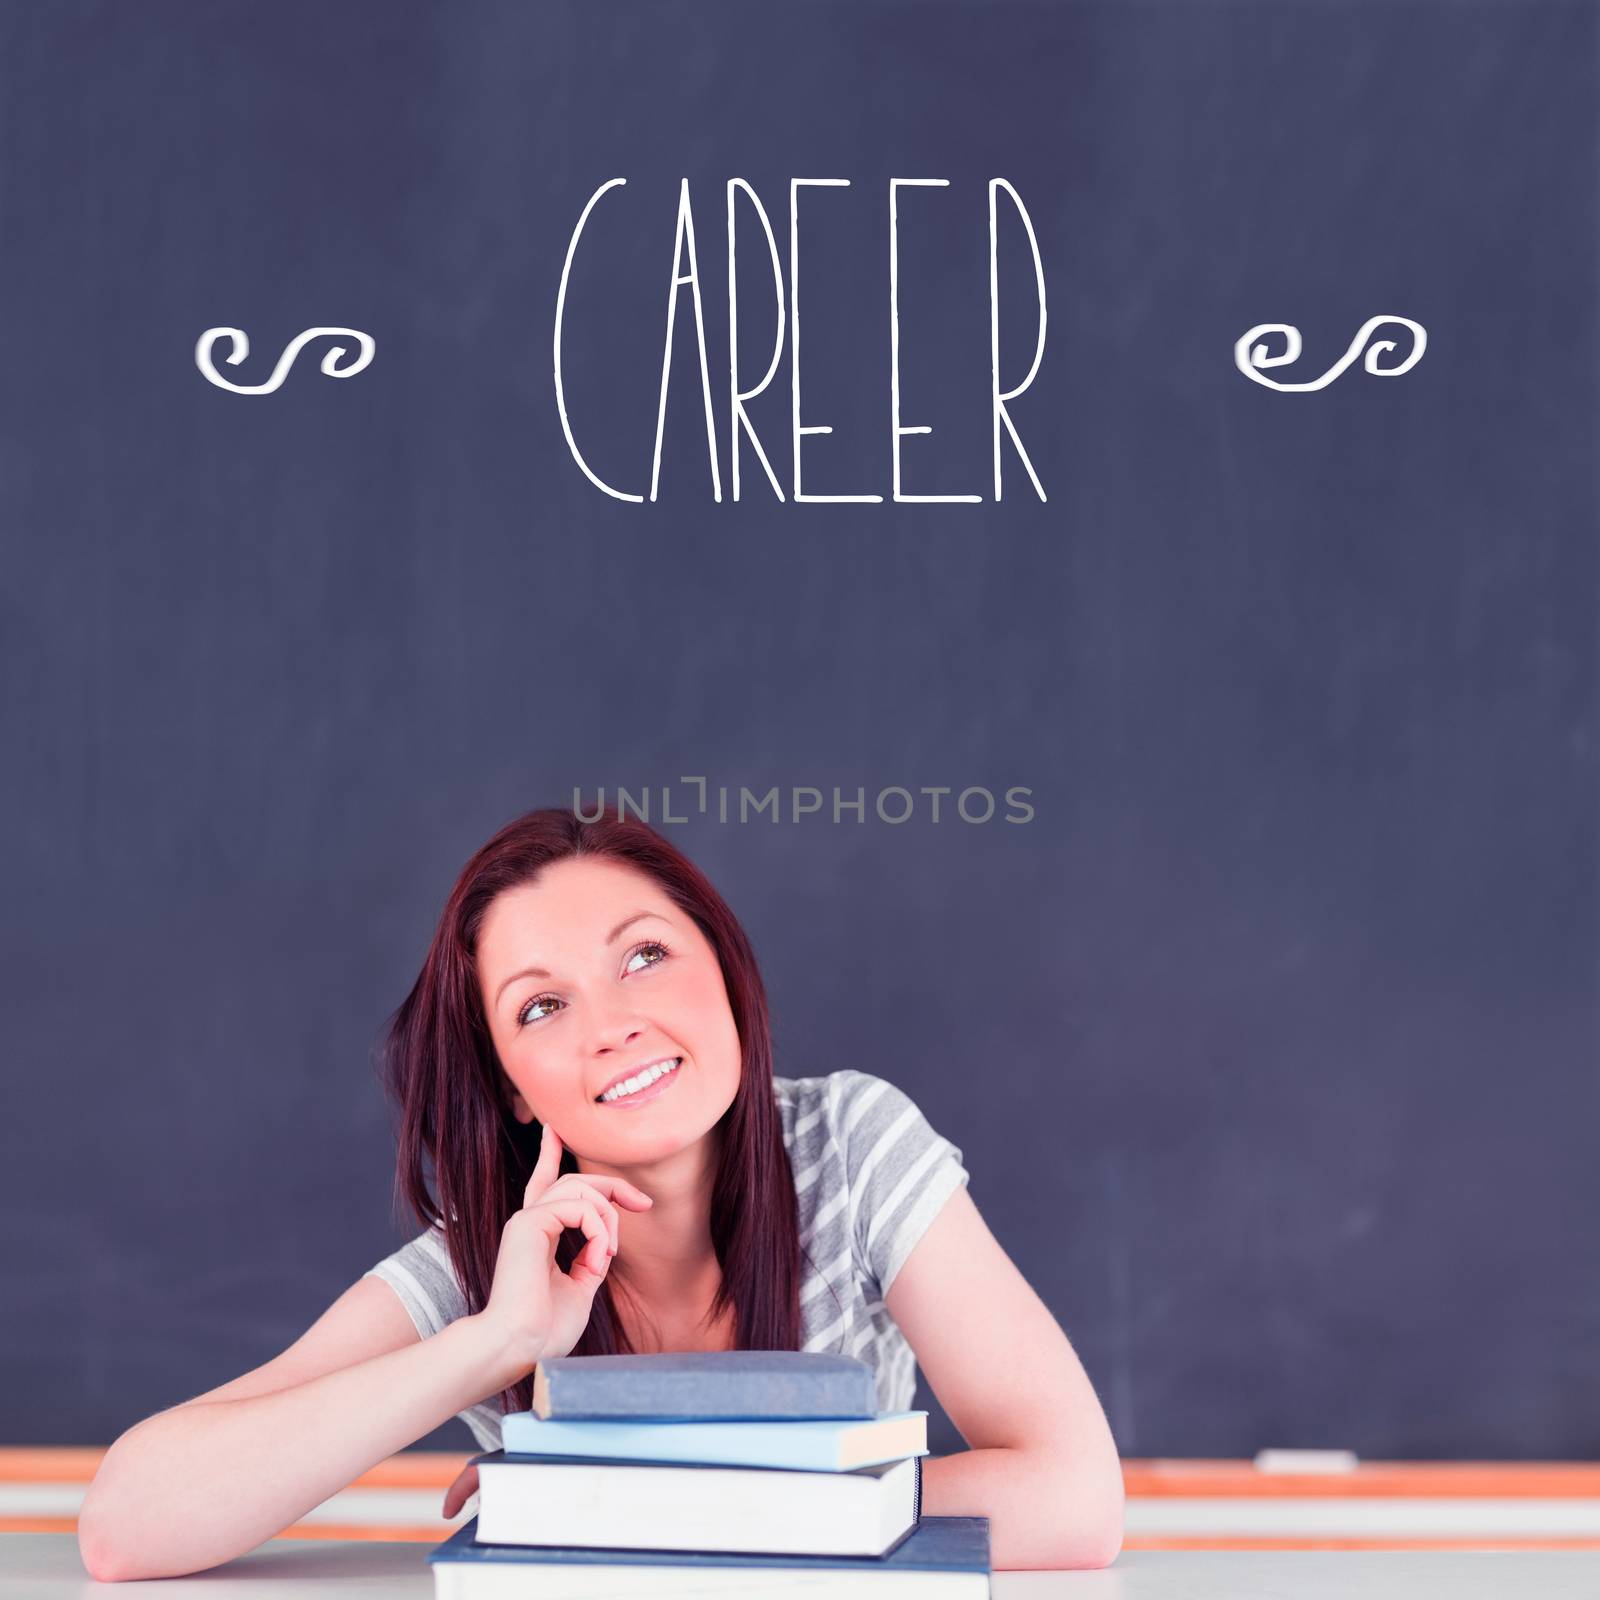 Career against student thinking in classroom by Wavebreakmedia